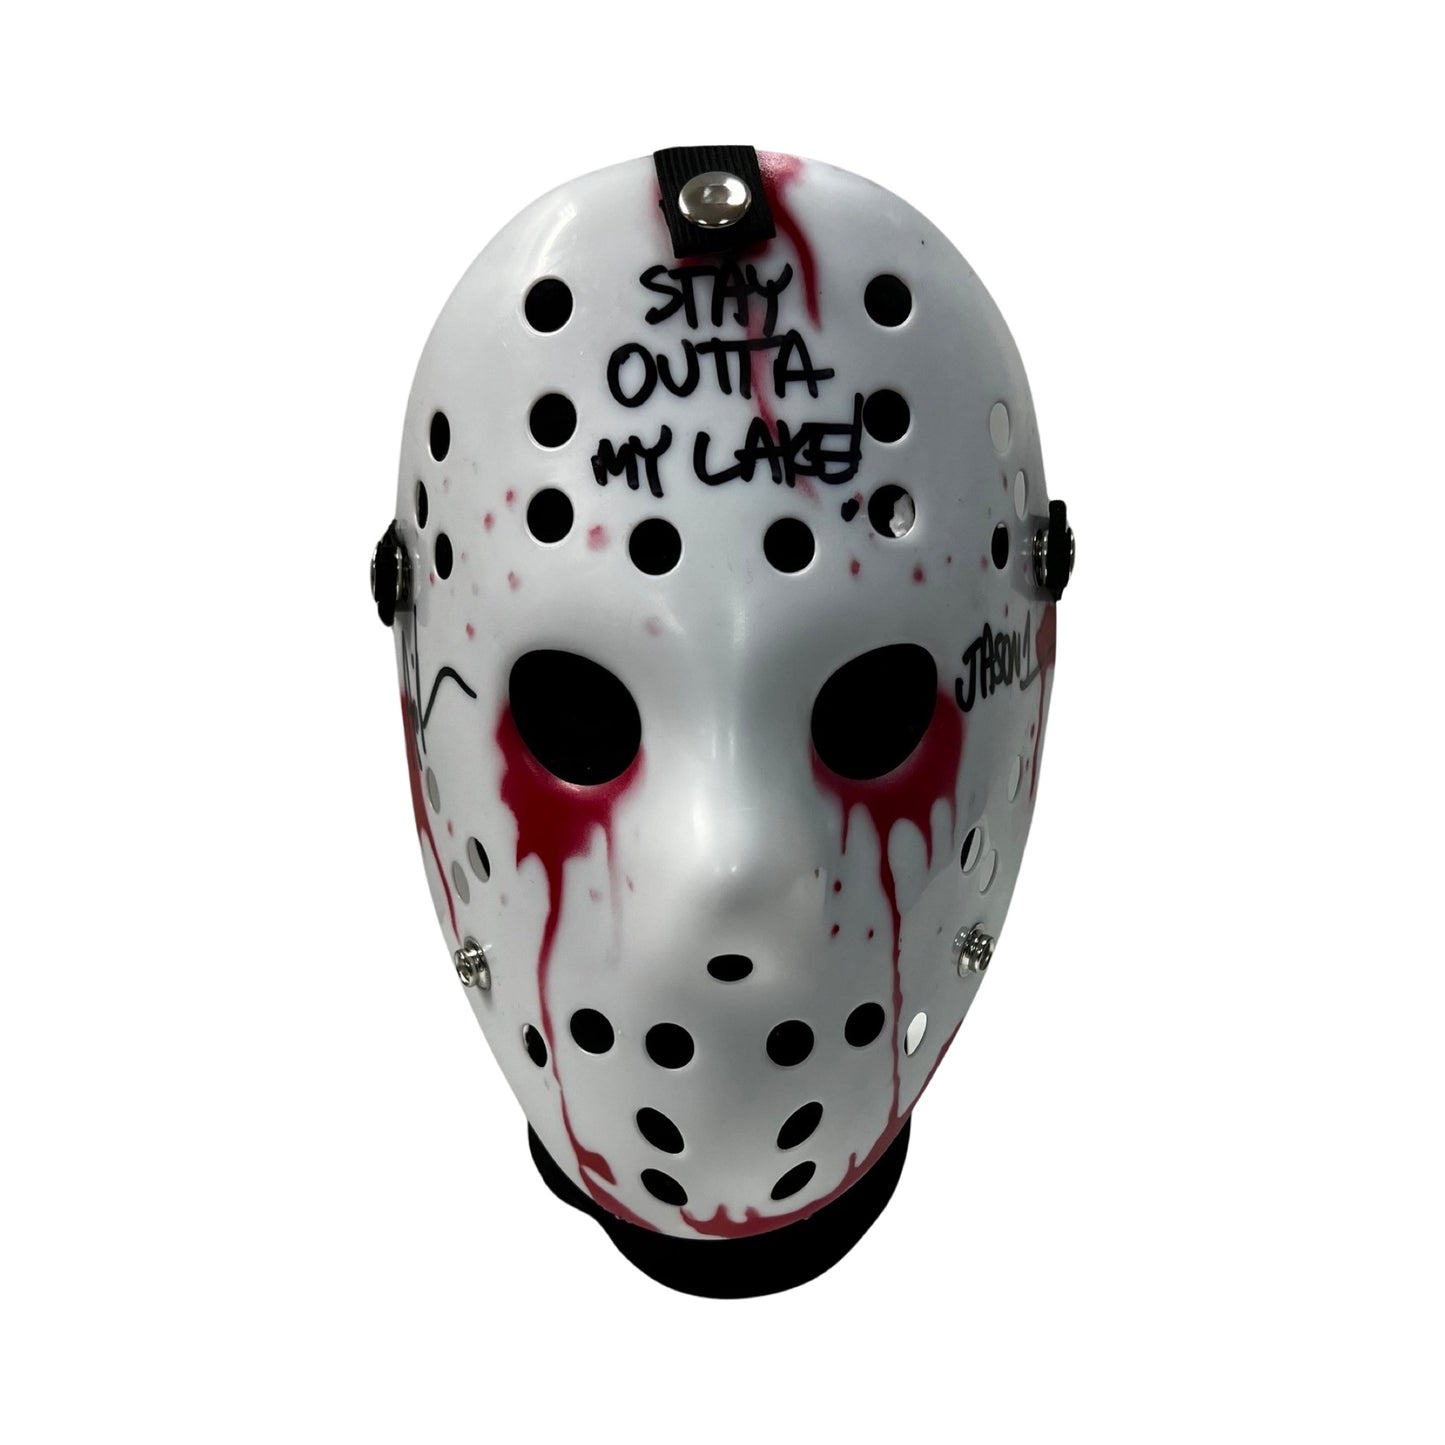 Ari Lehman Autographed Jason Voorhees Friday the 13th White Bloody Mask “Stay Outta My Lake! Jason 1” Inscriptions Steiner CX